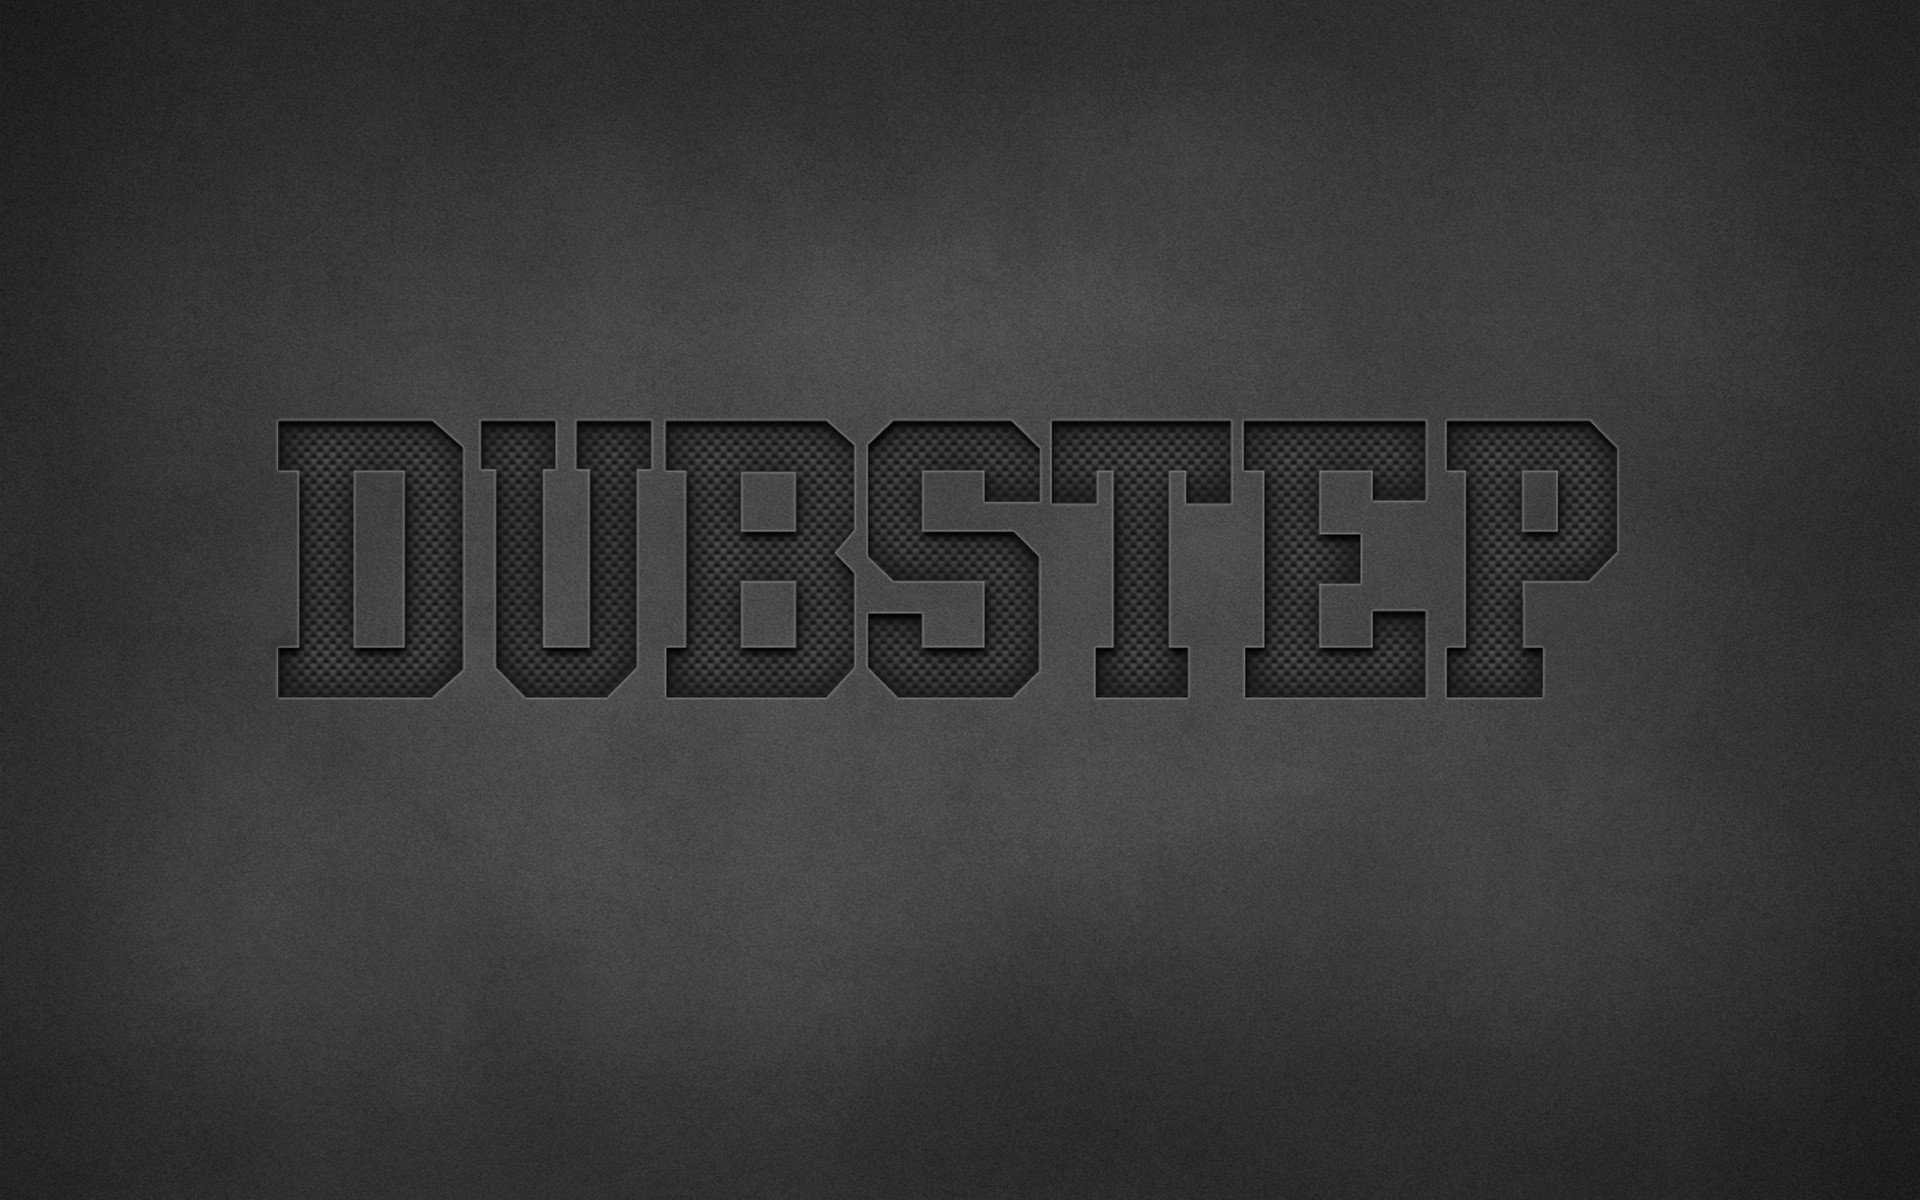 Top 25 best dubstep songs - spinditty